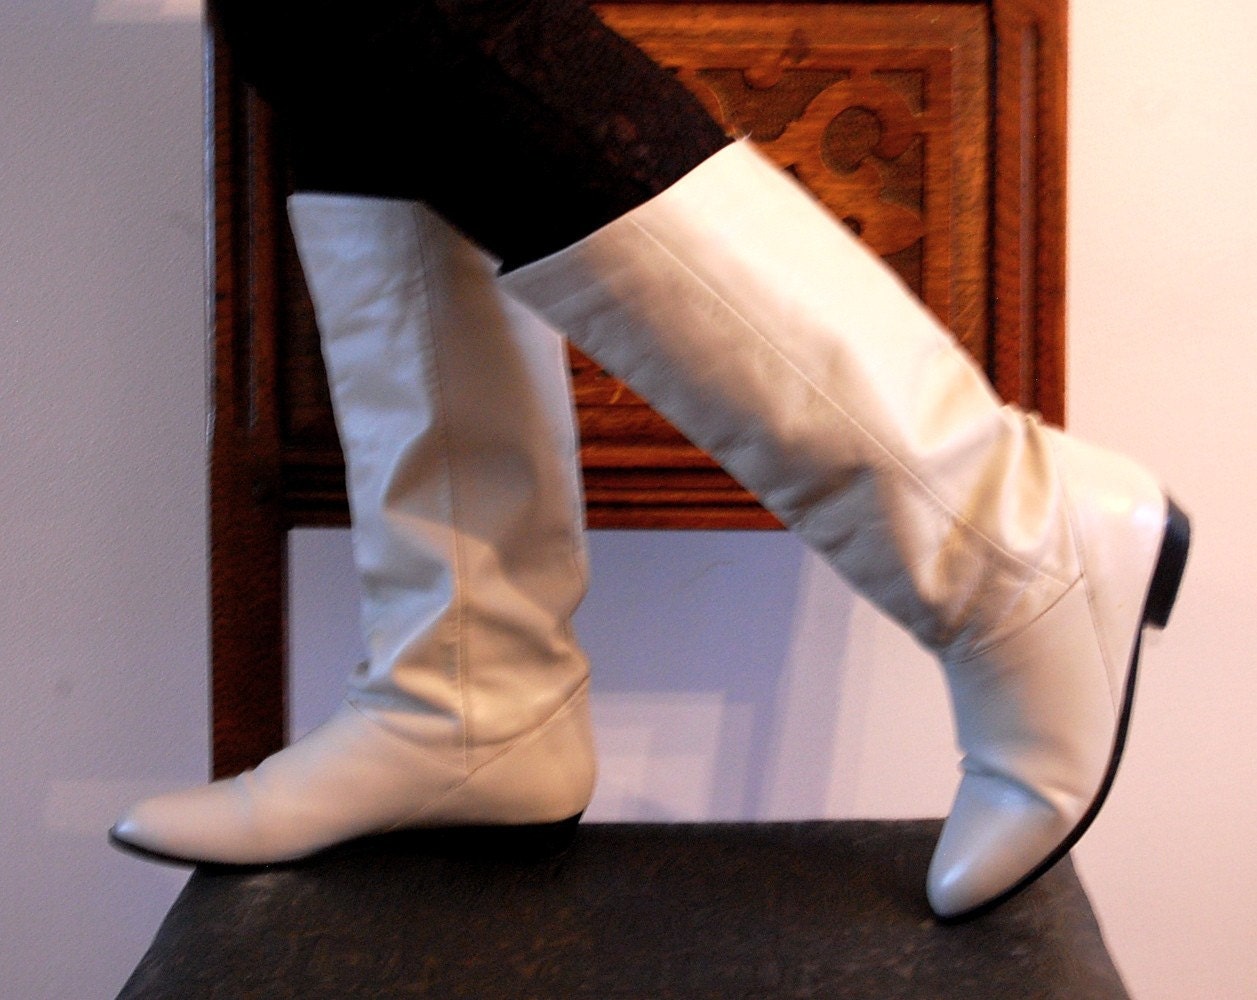 White Wedding Boots. SALE - Your White Wedding Boots - Size 7. From GingerKisses